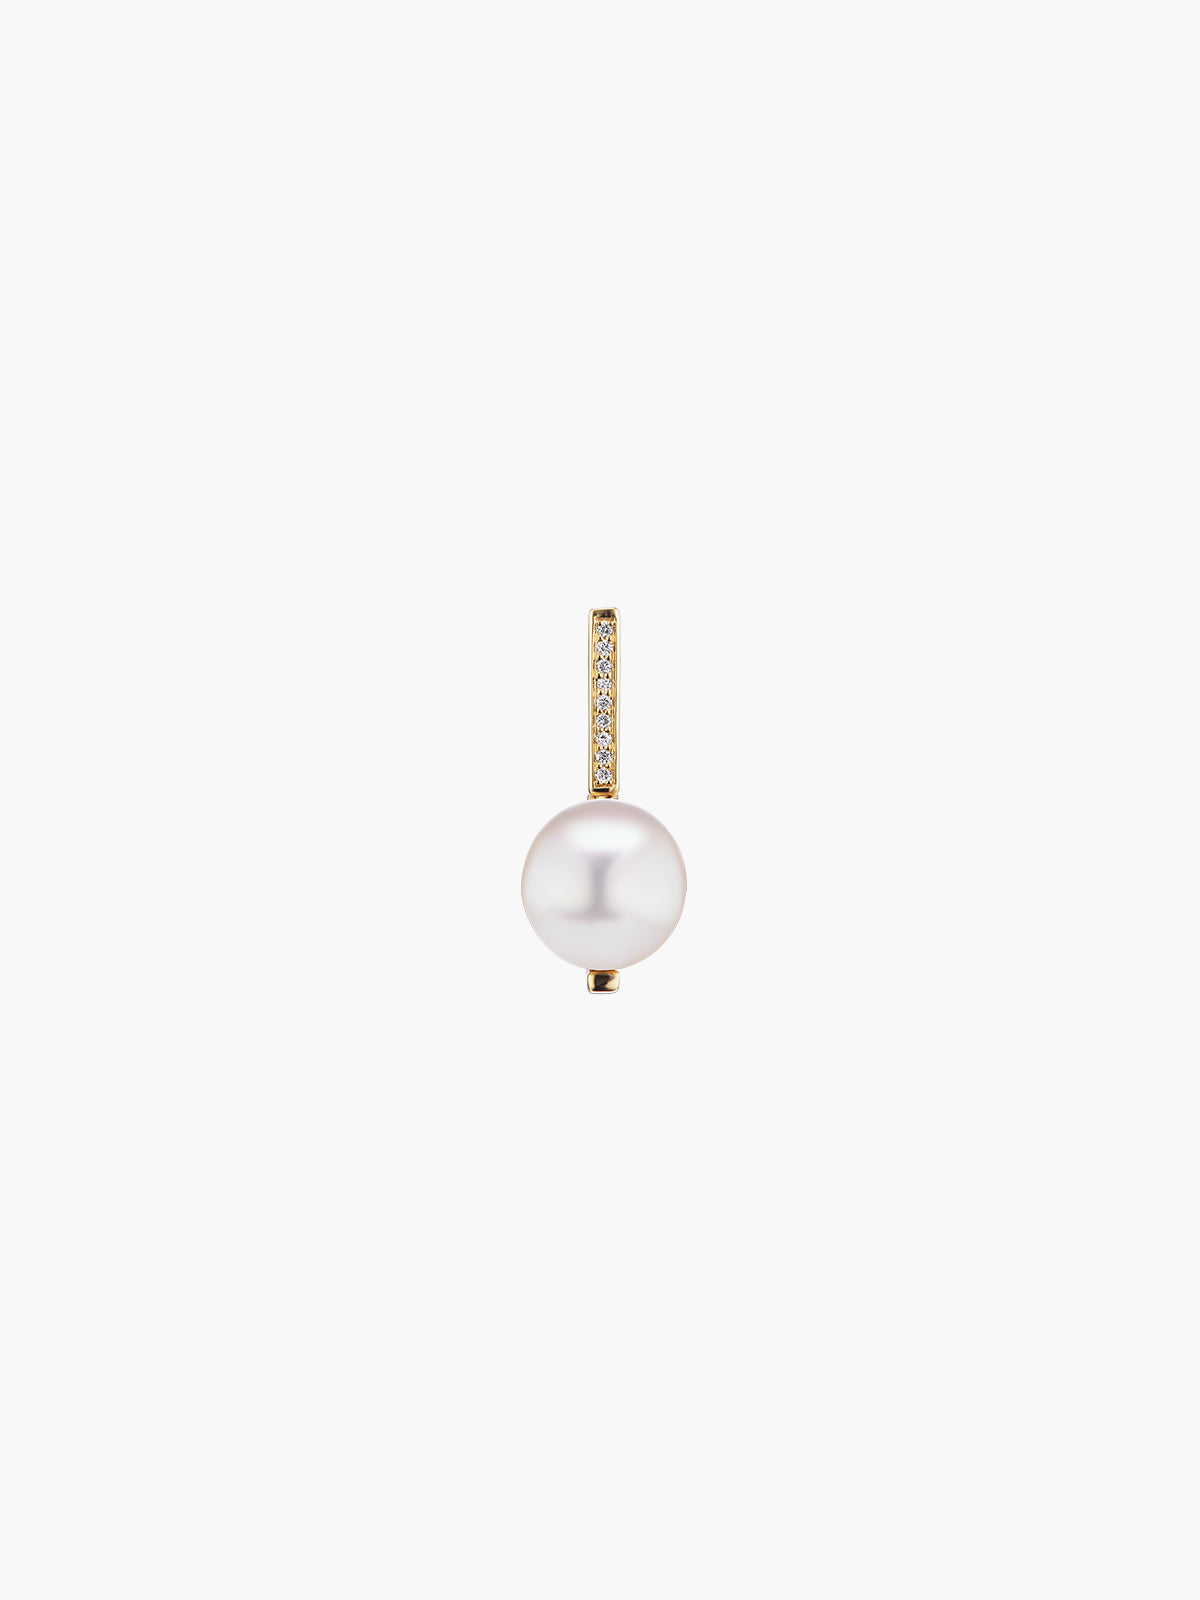 Exclusive Pearl Drop Earring - Fashionkind